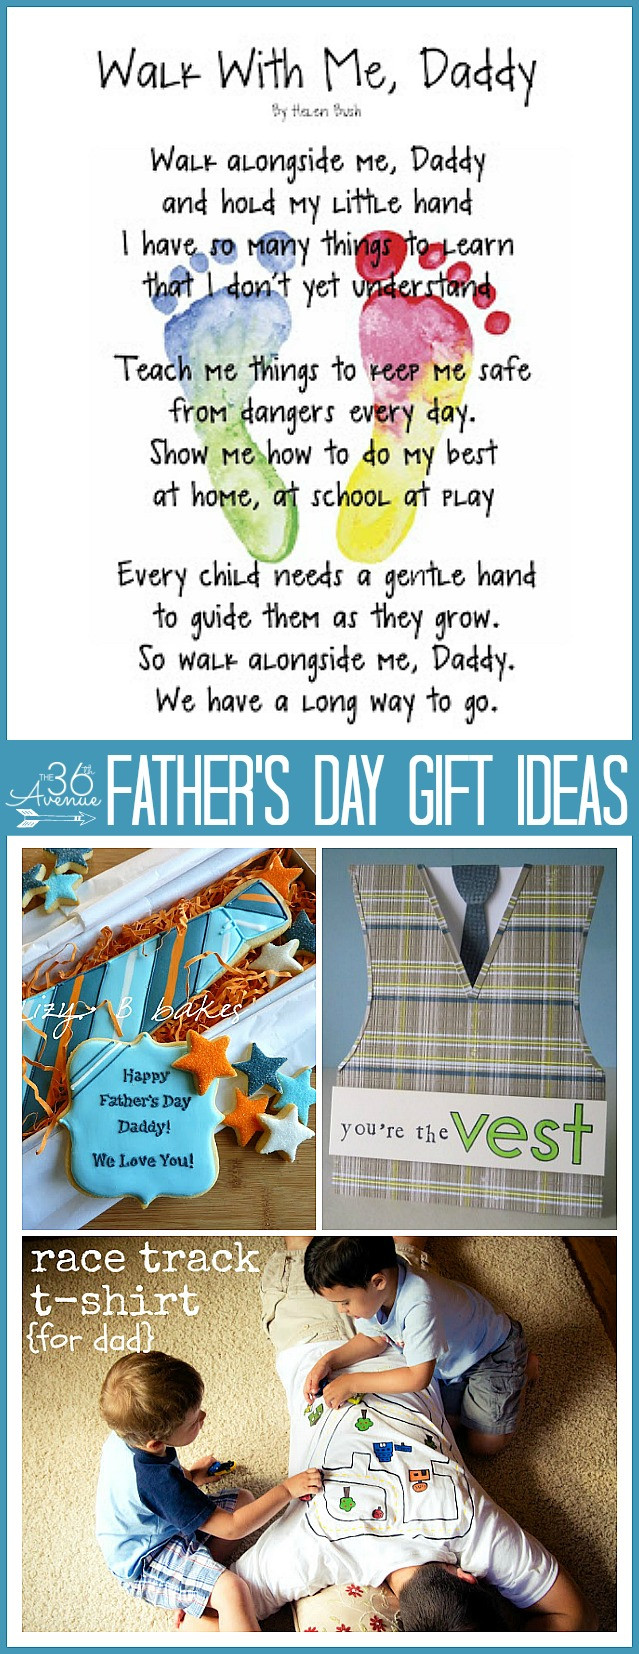 Grandfather'S Day Gift Ideas
 Father s Day Gifts Ideas The 36th AVENUE